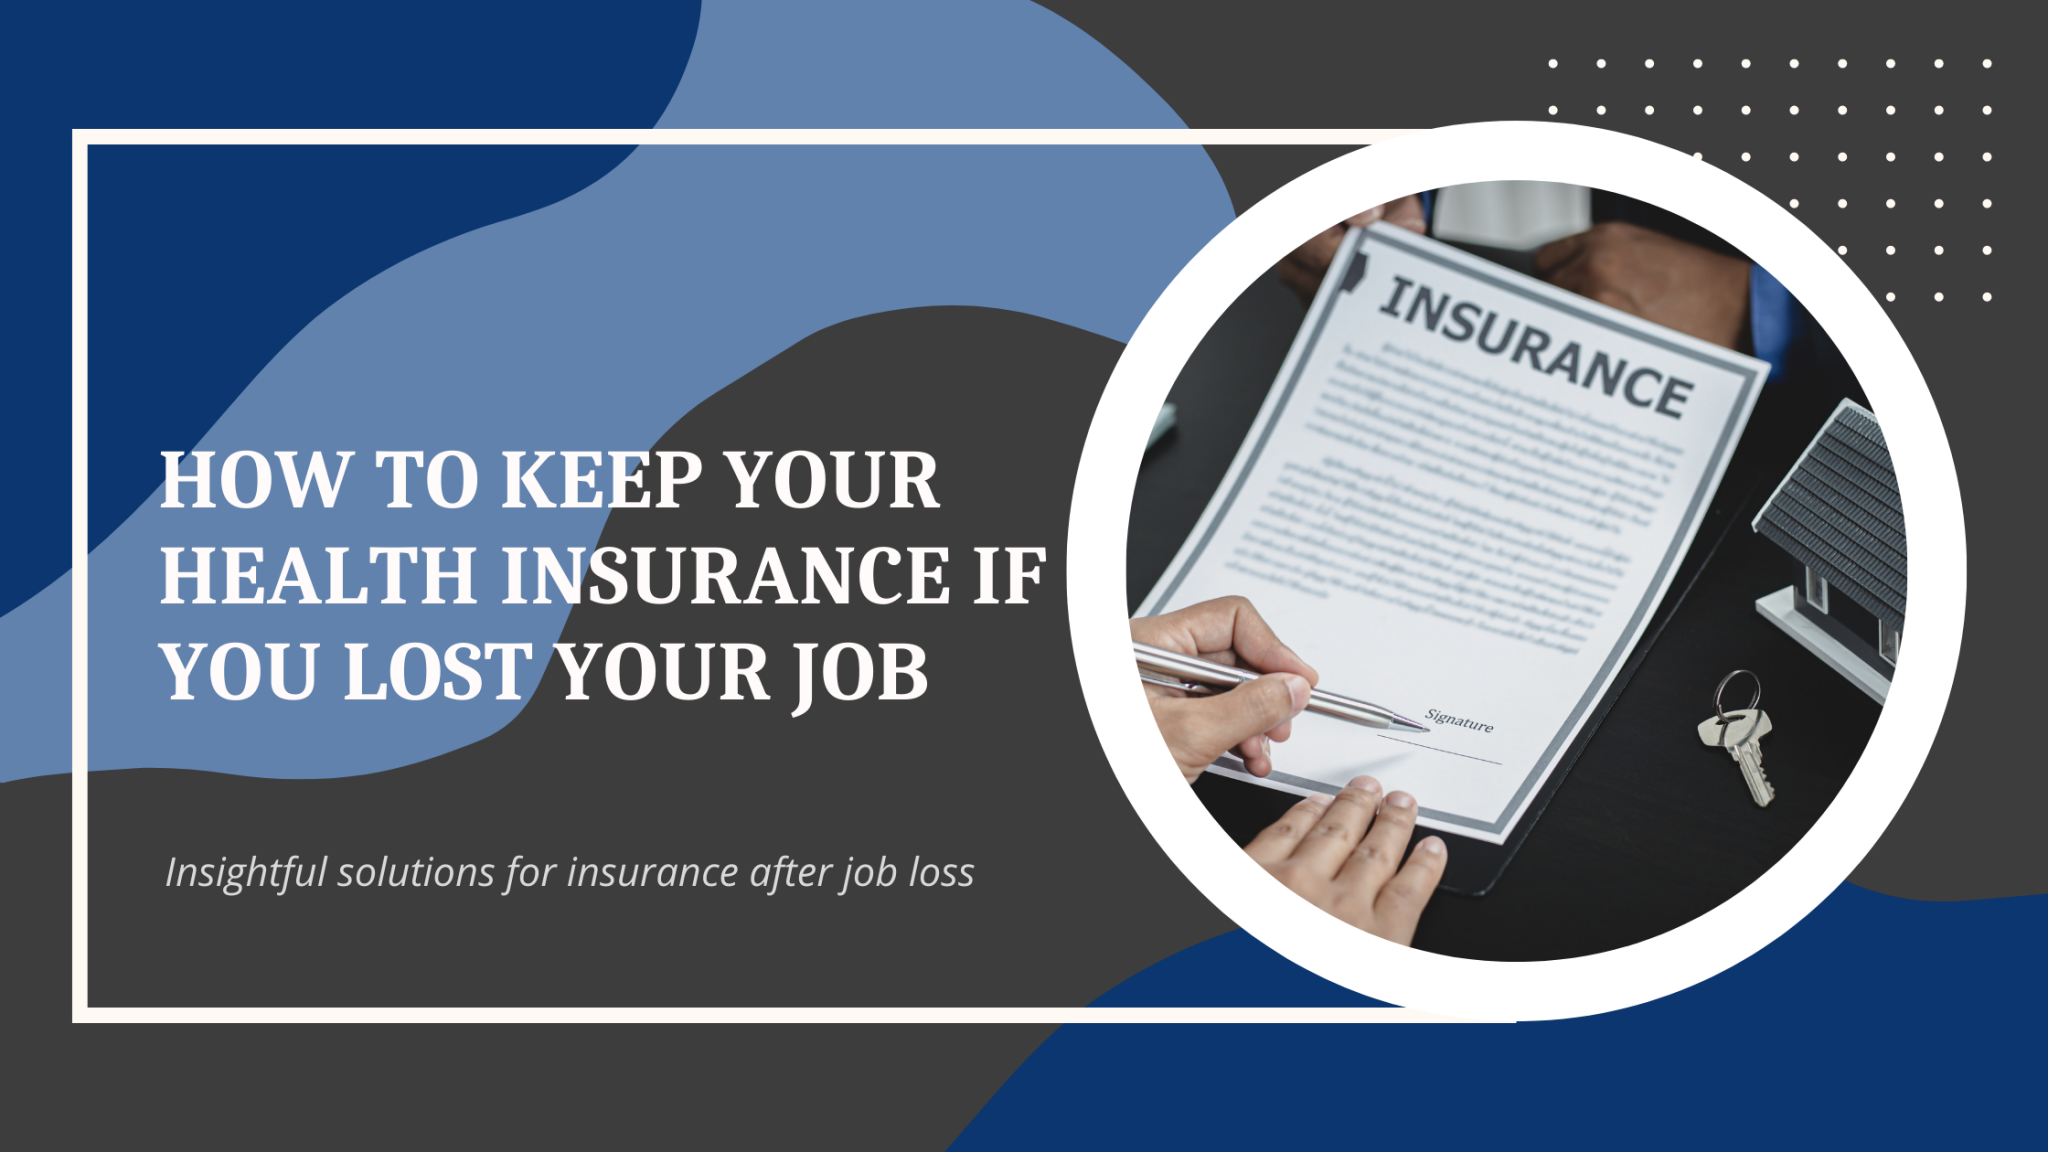 How to Keep Your Health Insurance if You Lost Your Job